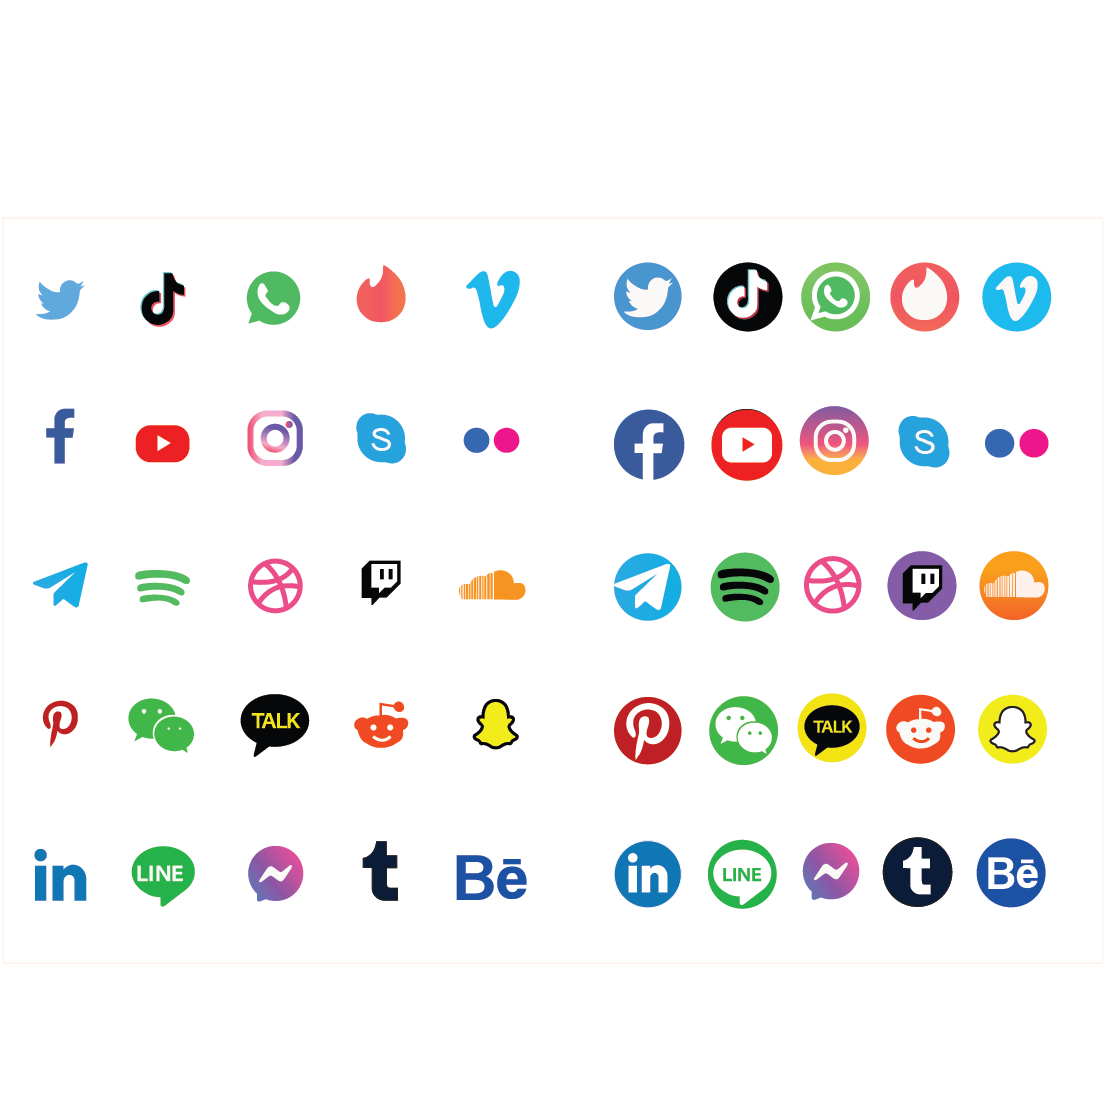 Set of 25 Social Media Icons for your design.